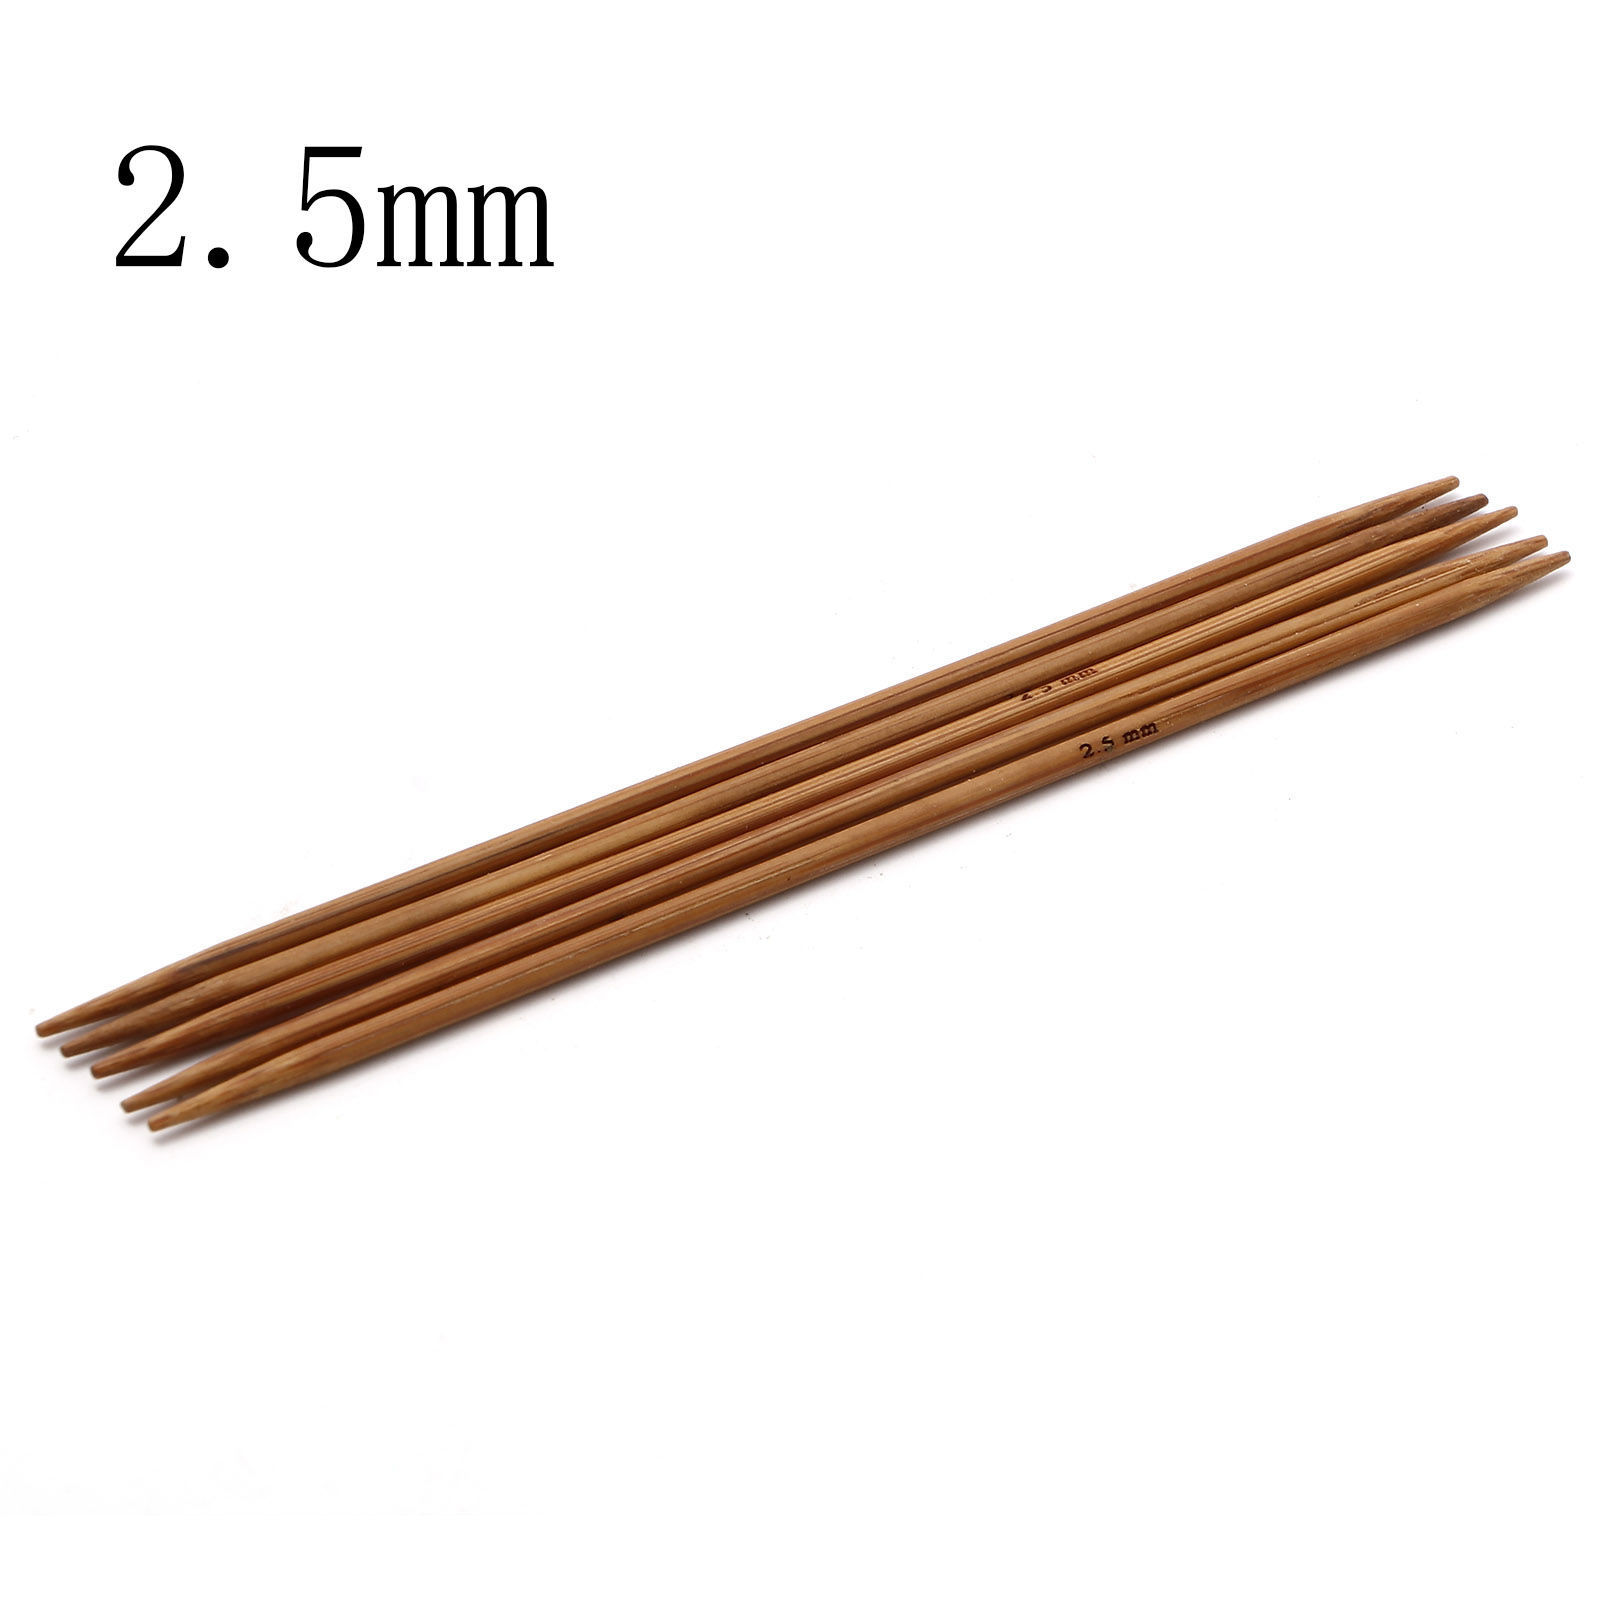 Picture of 2.5mm Bamboo Double Pointed Knitting Needles Brown 13cm(5 1/8") long, 5 PCs